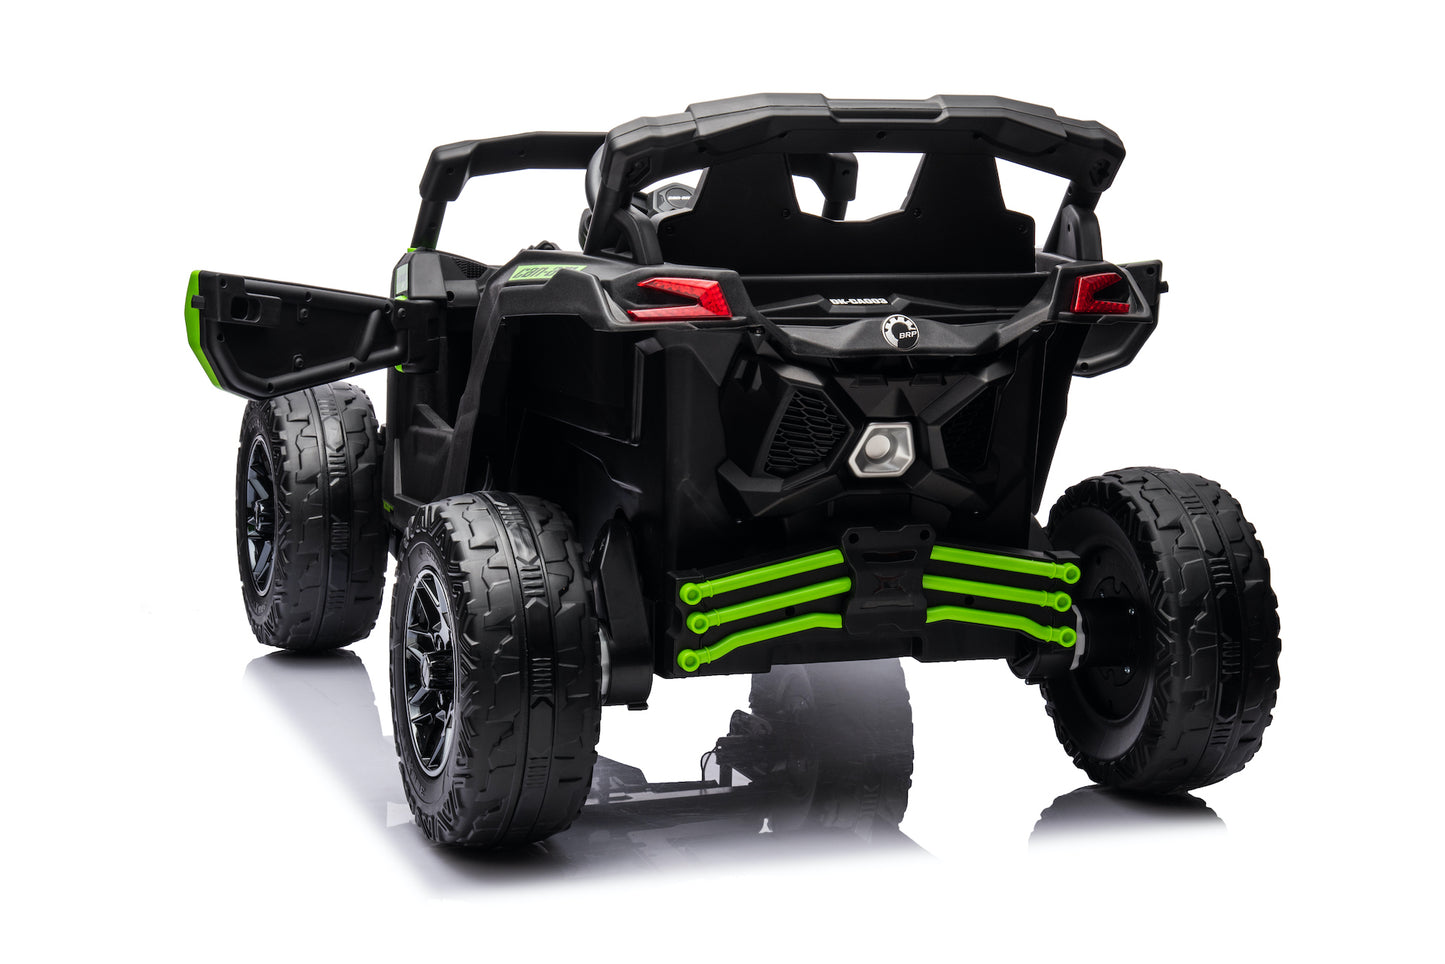 Licensed 24V Can-Am Maverick Kids Electric Ride on UTV Buggy with Remote - Green